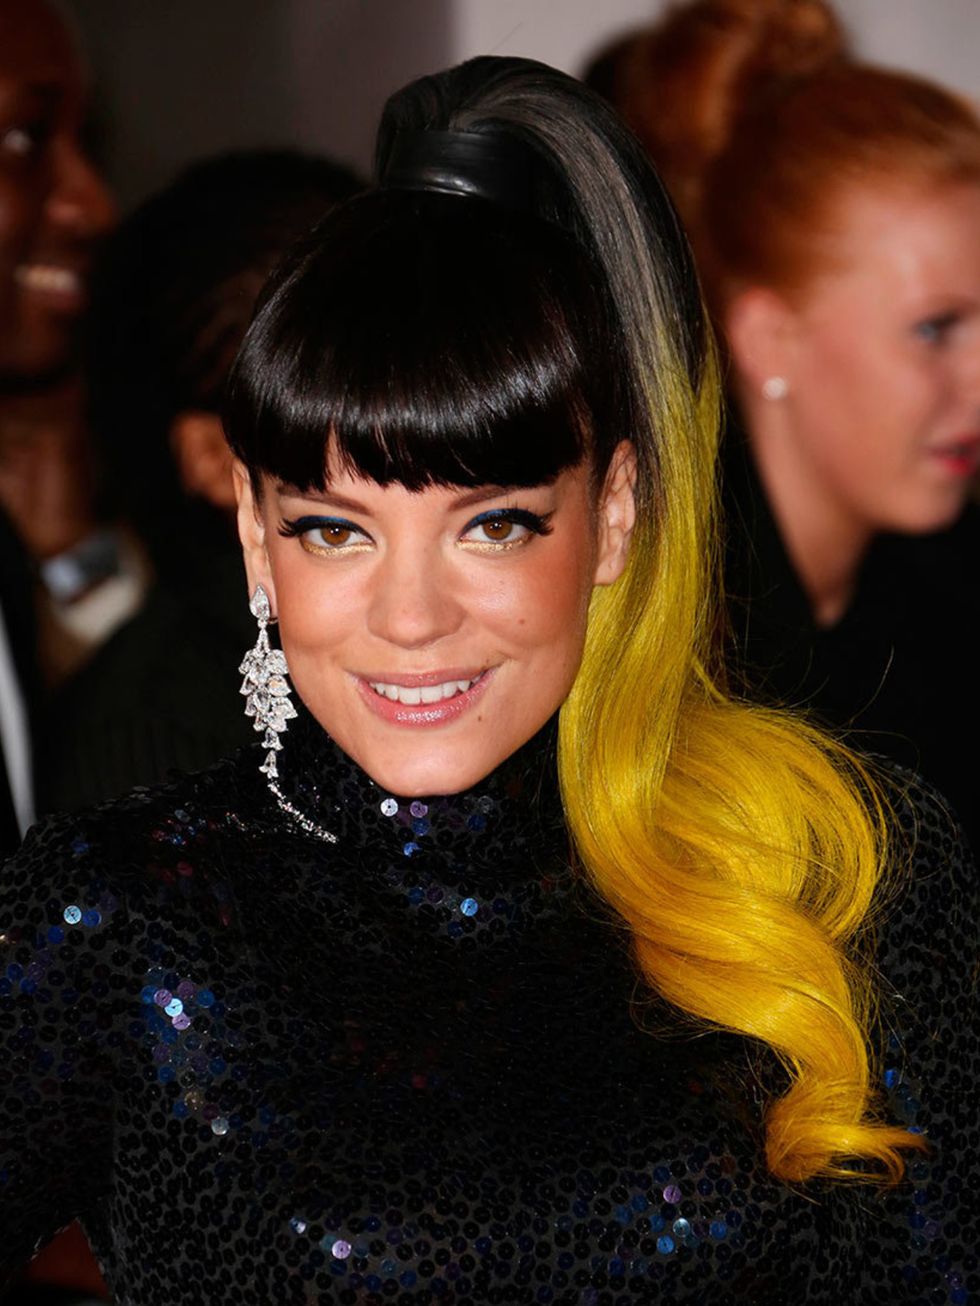 <p>Lily Allen opted for the same high ponytail as she wore at the <a href="http://www.elleuk.com/elle-style-awards/red-carpet/elle-style-awards-2014-red-carpet-celebrities-and-designers">ELLE Style Awards</a> this week, only at the BRIT Awards she added c